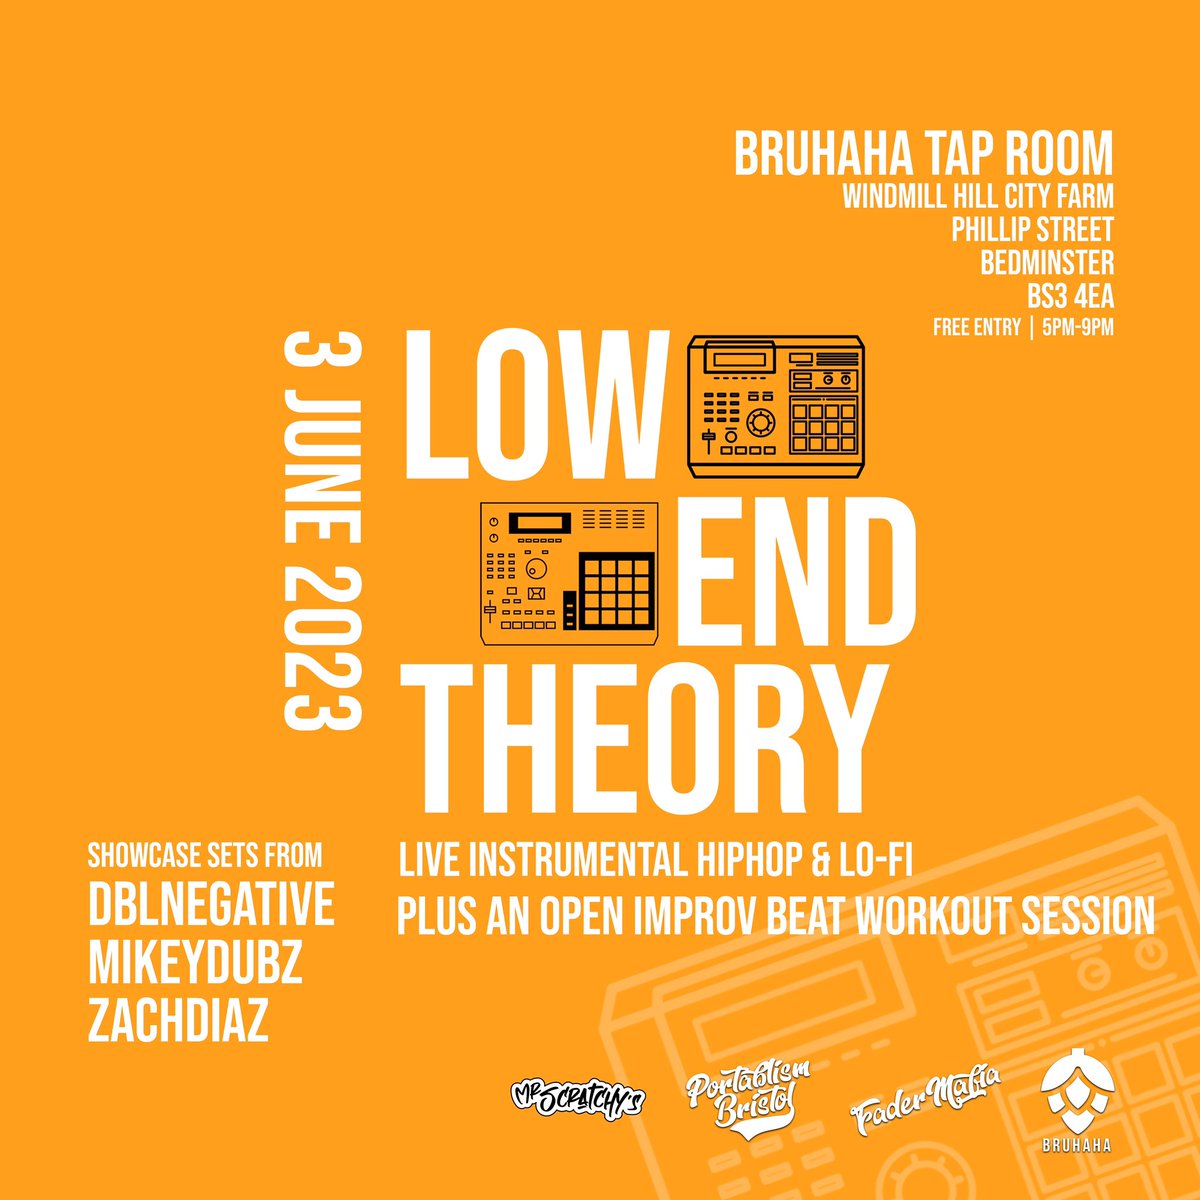 Going down from 17:00 at Bruhaha, Bedminster

#livehiphop #lofi #boombap #aleopardstolemyshoes #lowendtheory